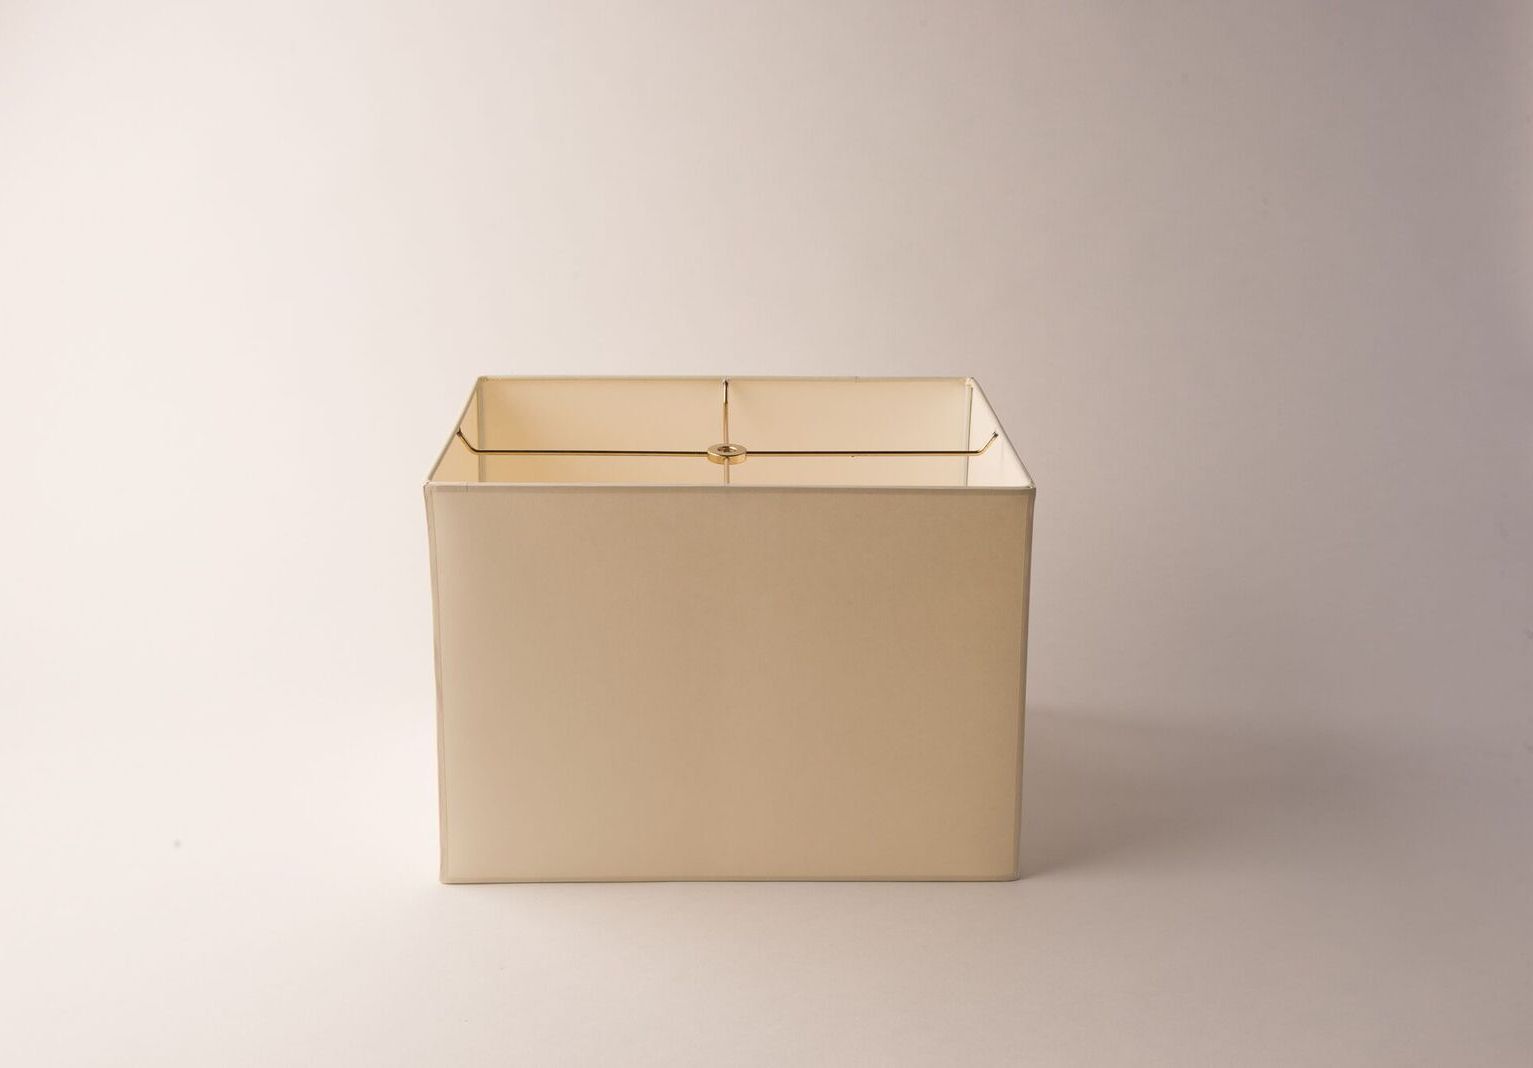 https://www.hotel-lamps.com/resources/assets/images/product_images/Rectangle Box Vellum Paper.jpeg